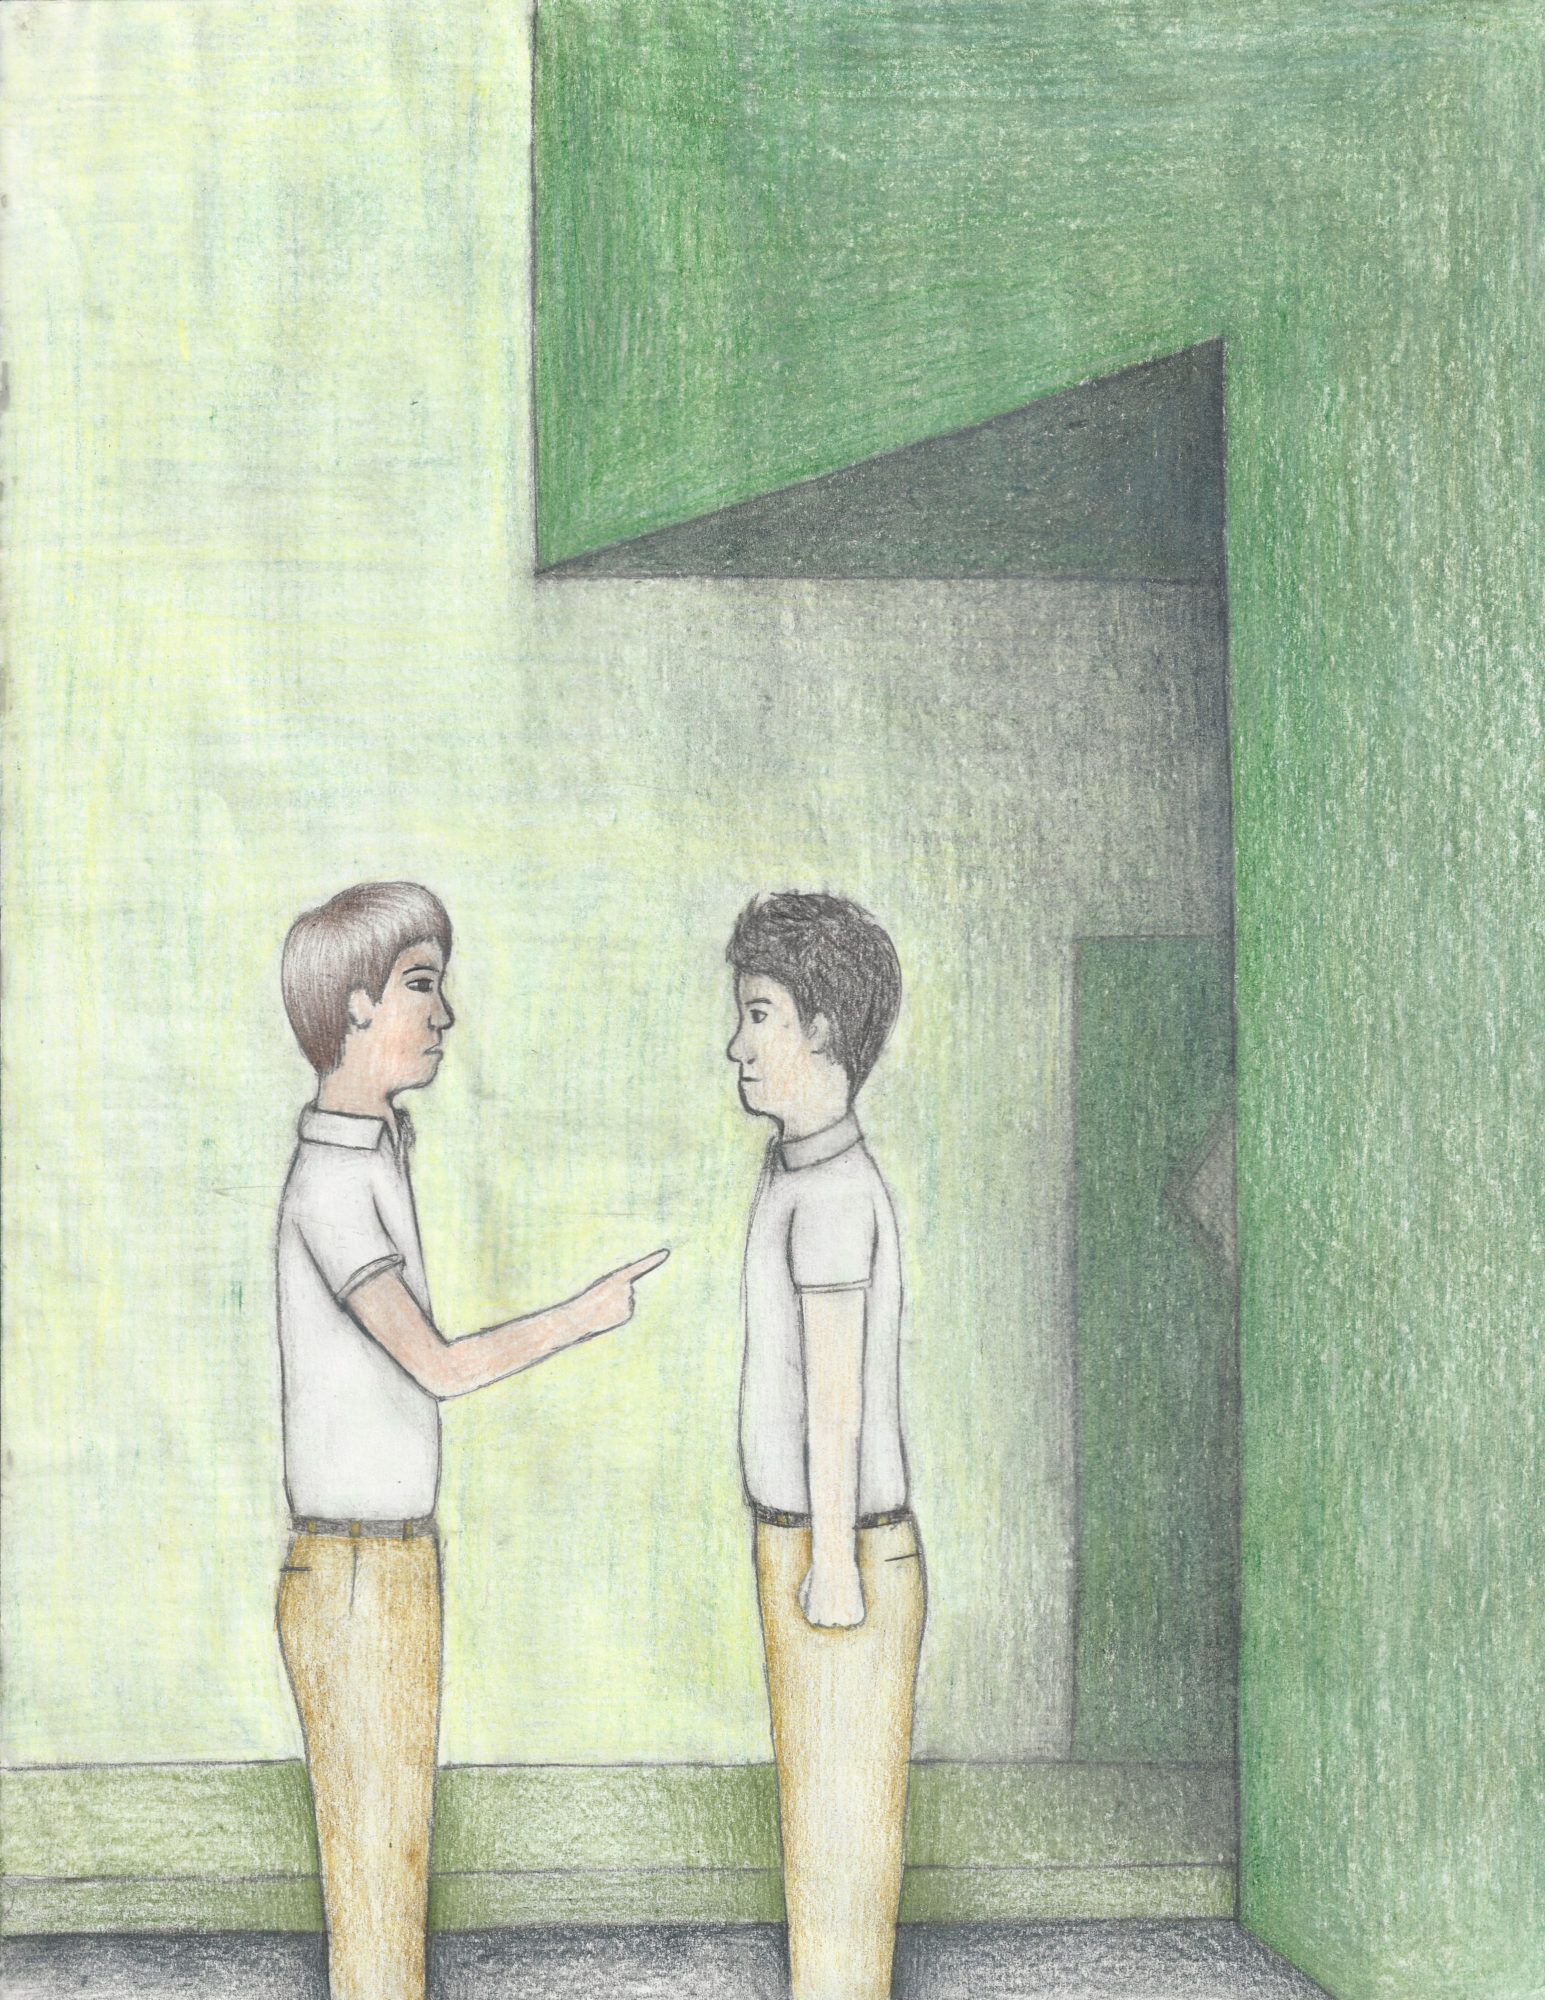 drawing of a boy facing and pointing at another boy in a green room